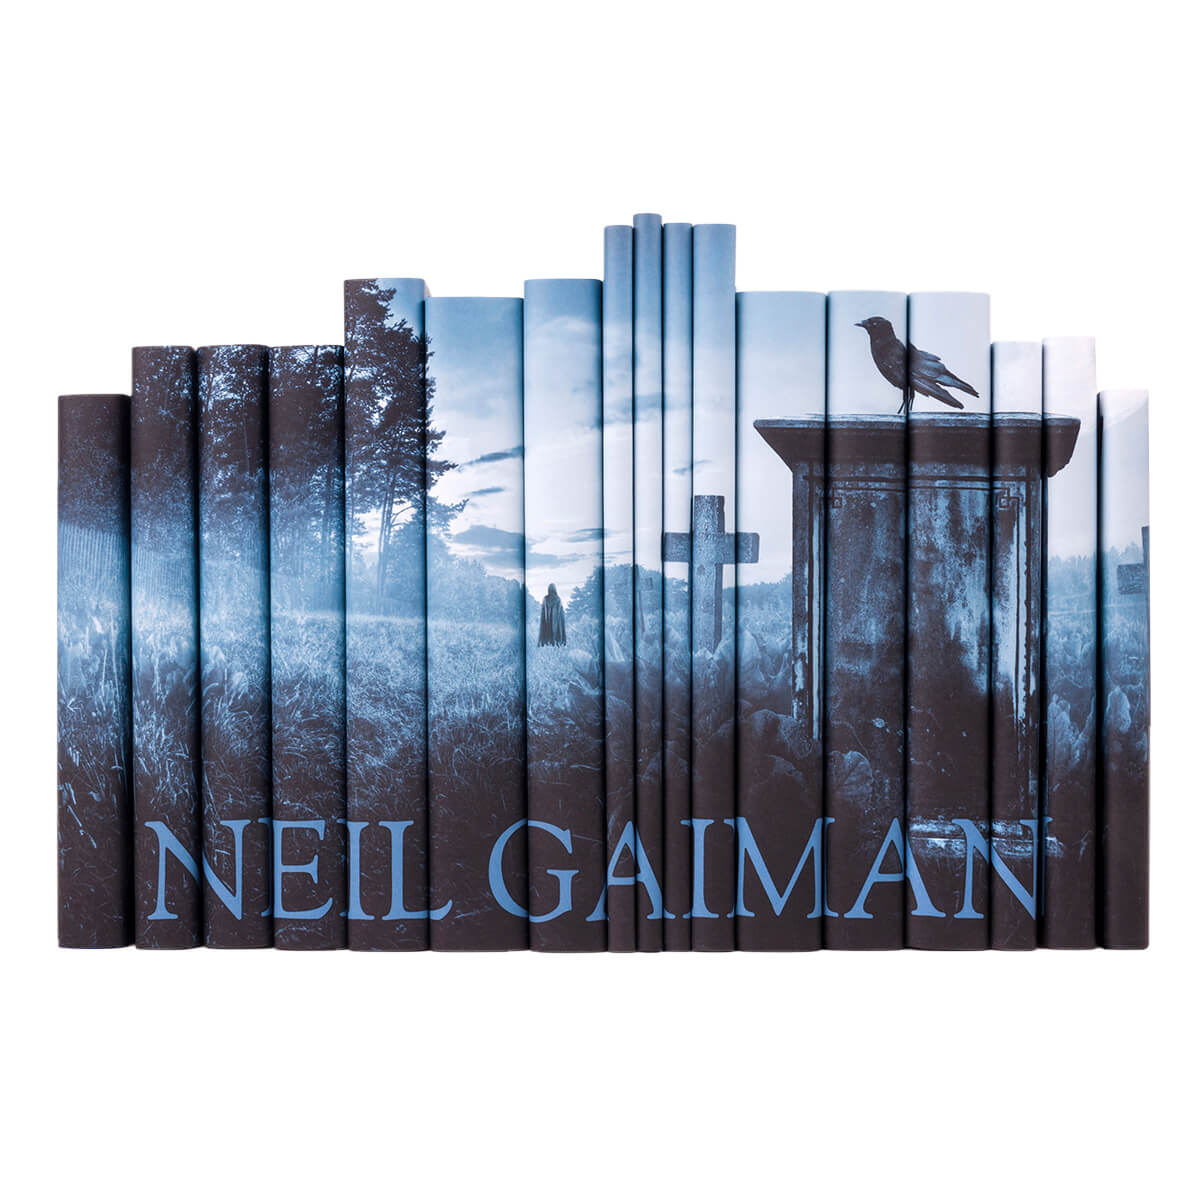 Neil Gaiman Complete Works - Full Custom - Get Started with a Deposit